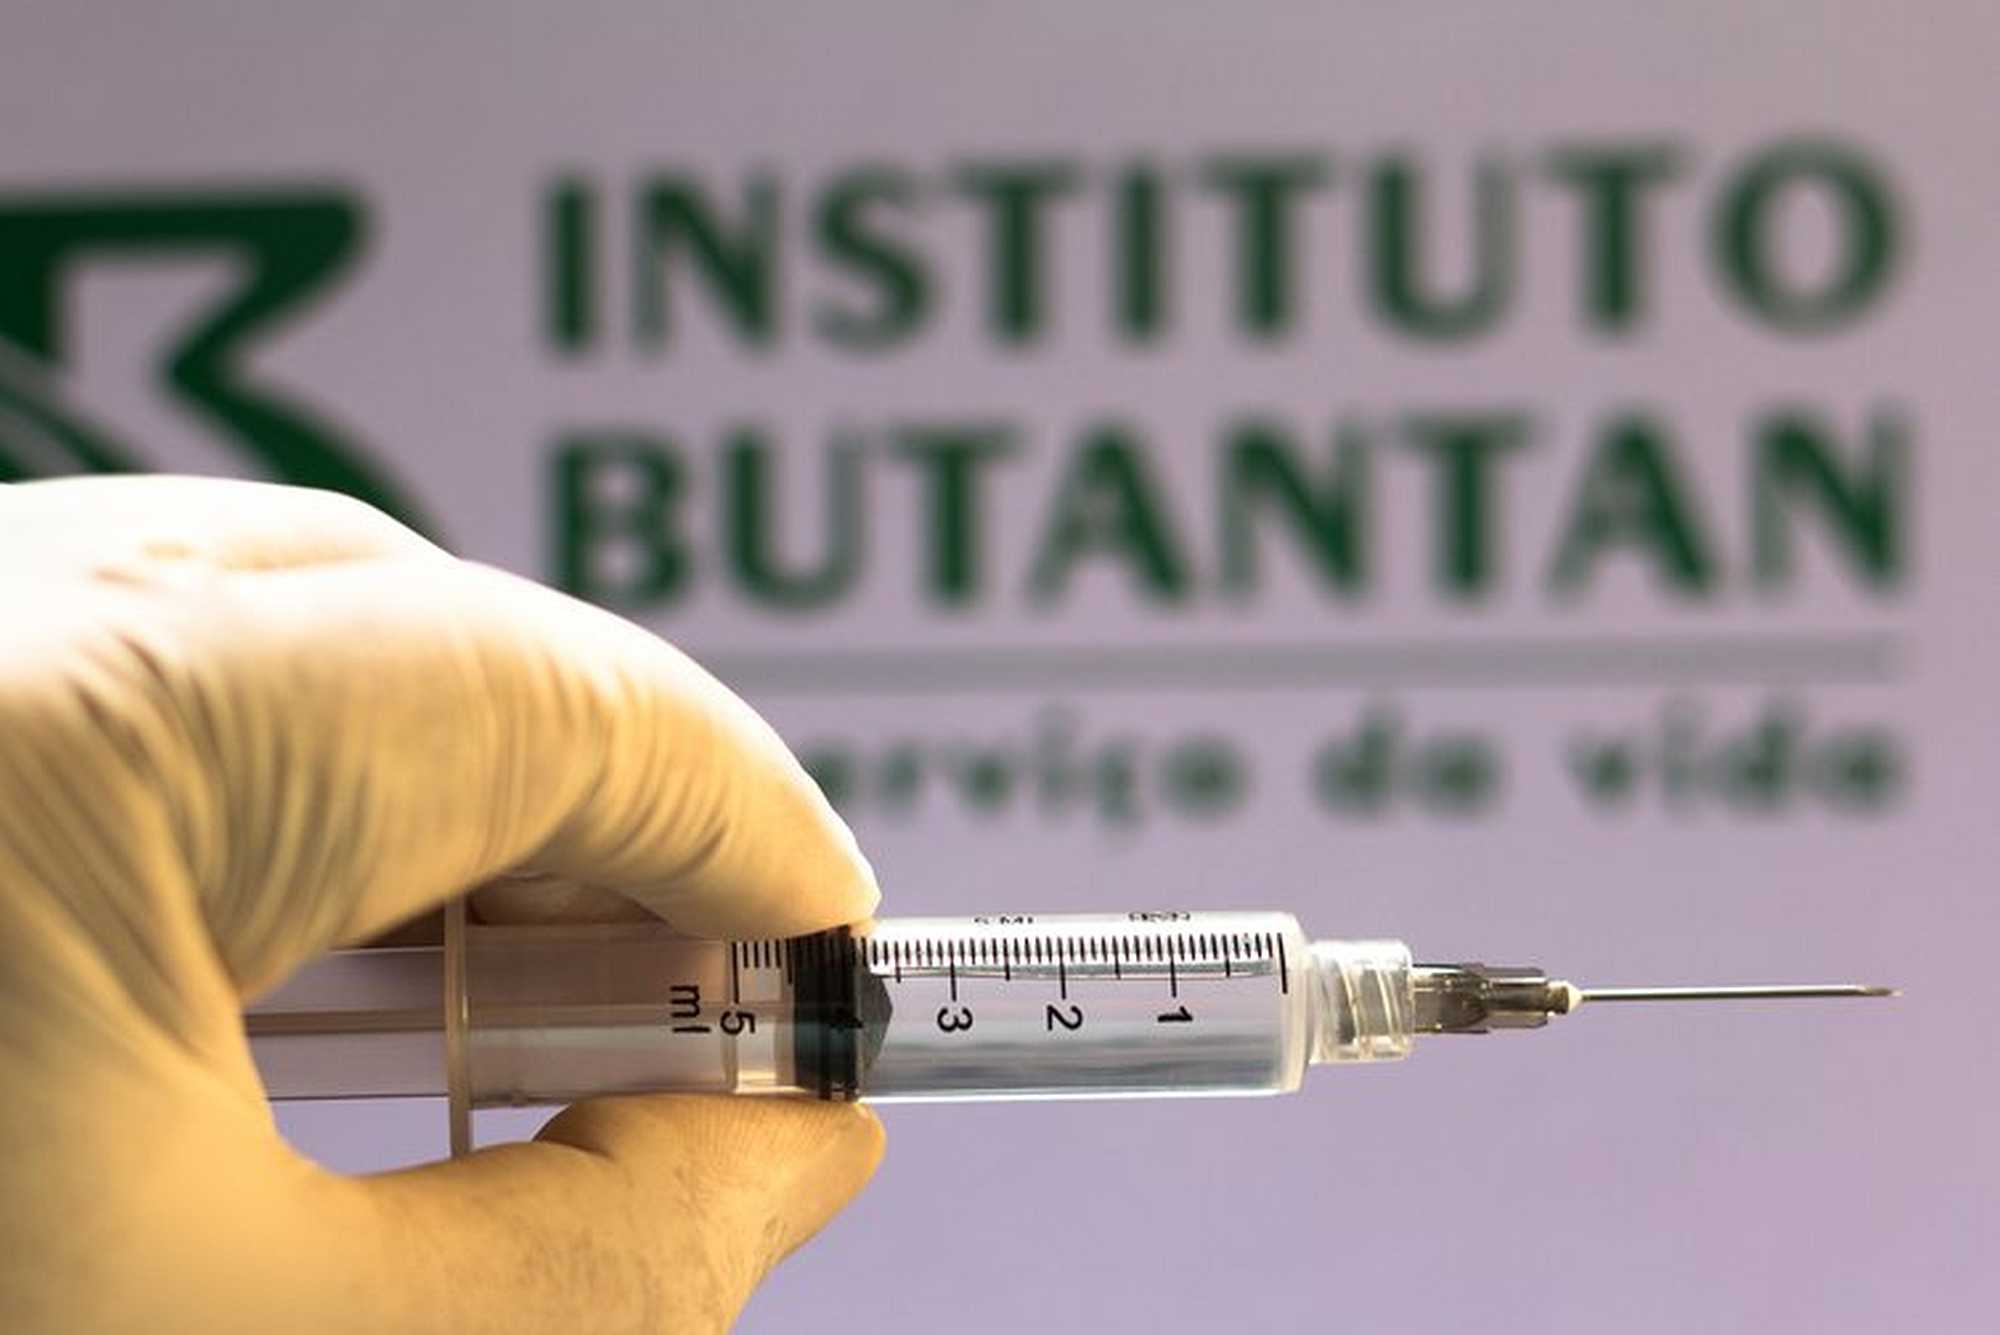 Brazil's Butantan Institute is manufacturing a coronavirus vaccine in partnership with the Chinese company Sinovac | Rafael Henrique/SOPA Images/SIPA USA/PA Images